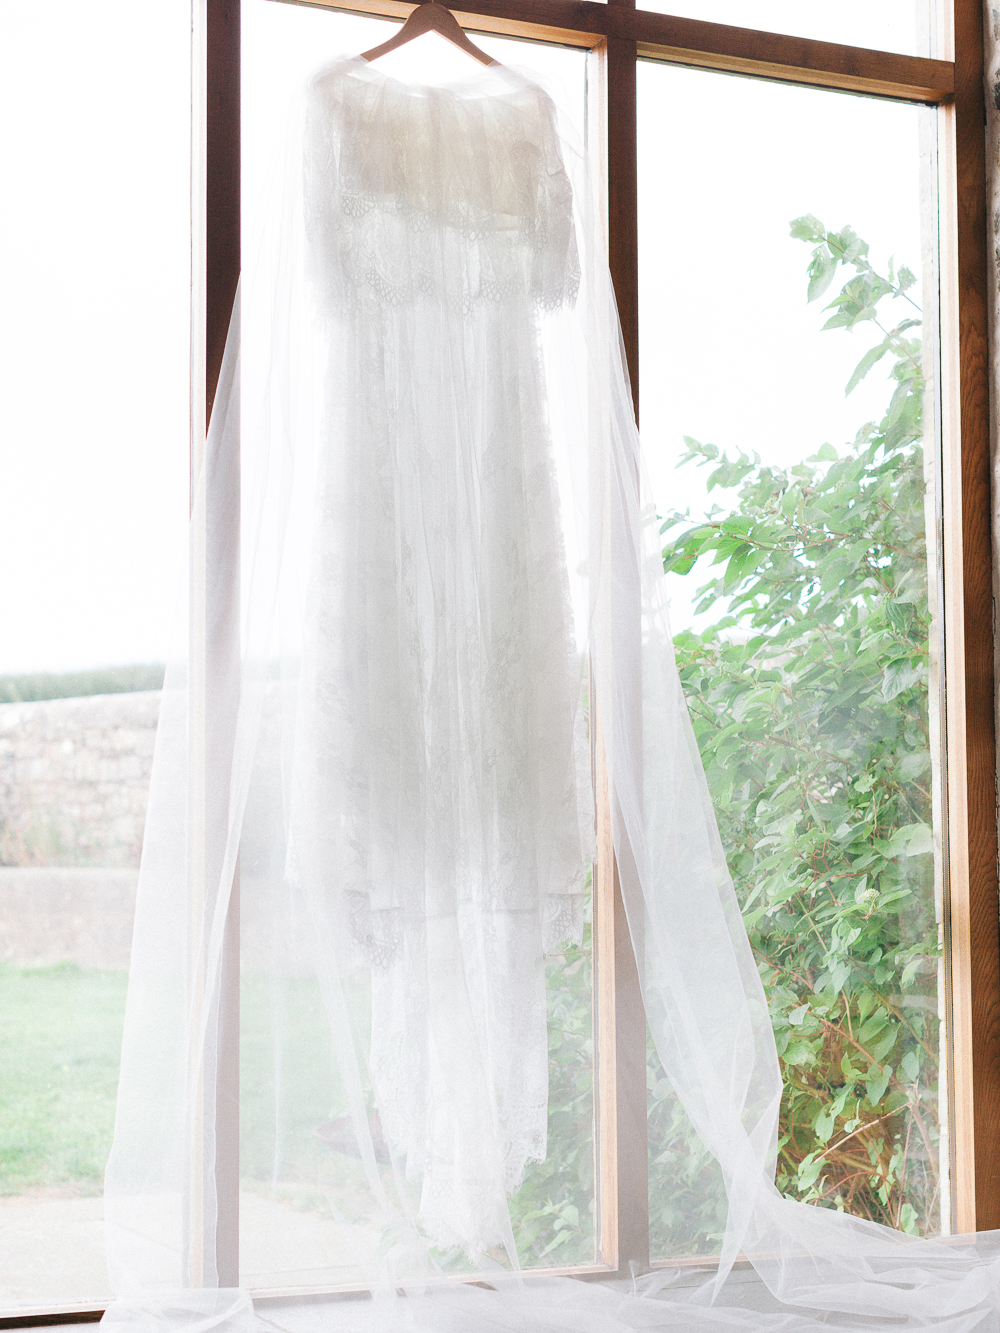 Chantilly lace wedding dress hanging in the window of Rosedew Farm